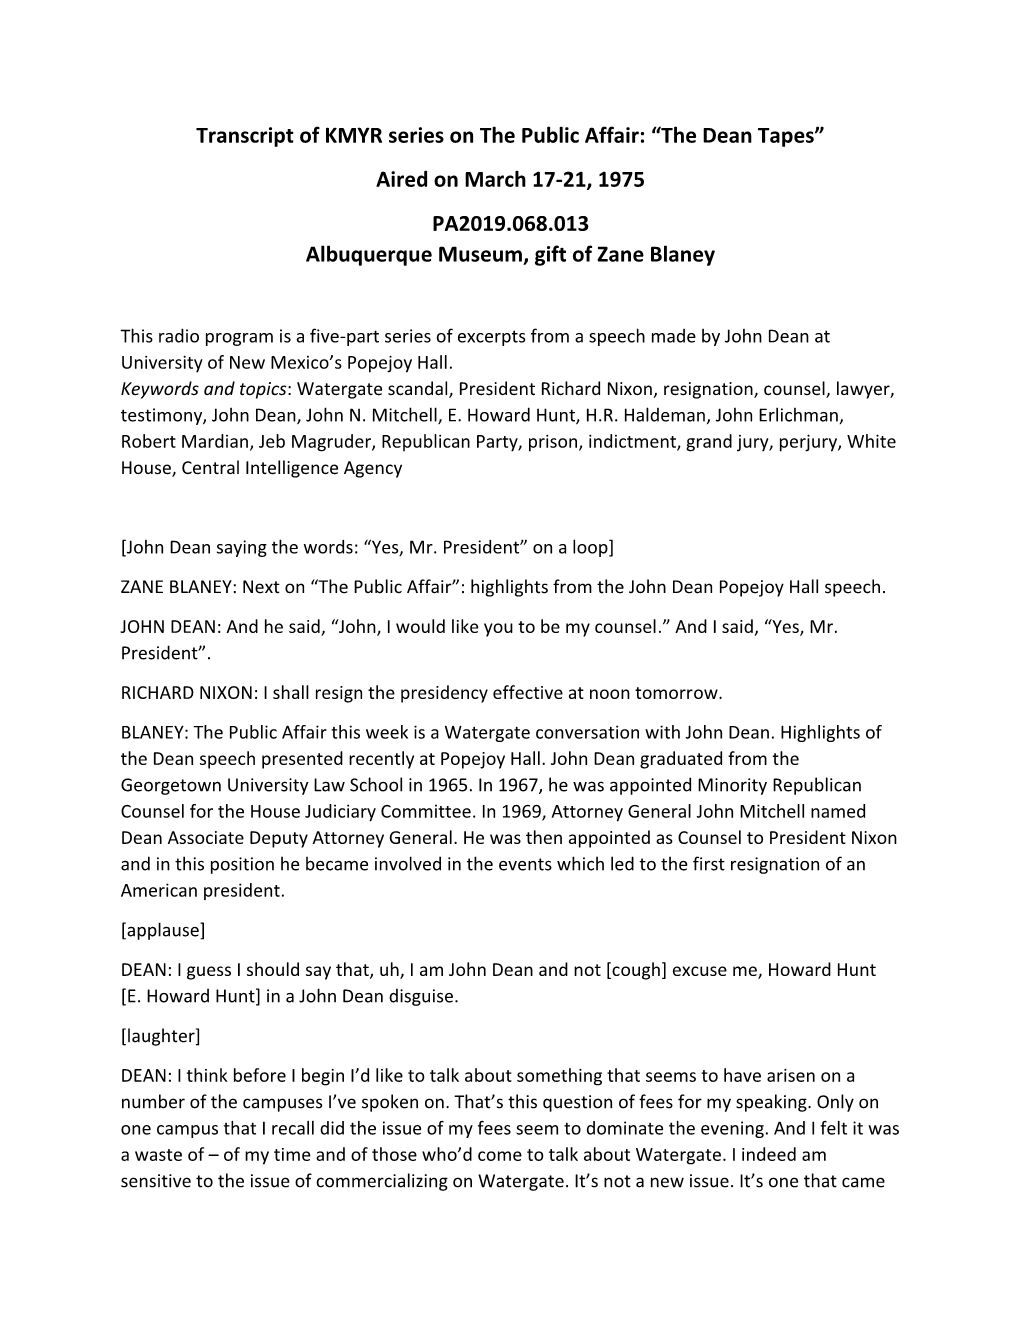 Transcript of KMYR Series on the Public Affair: “The Dean Tapes” Aired on March 17-21, 1975 PA2019.068.013 Albuquerque Museum, Gift of Zane Blaney